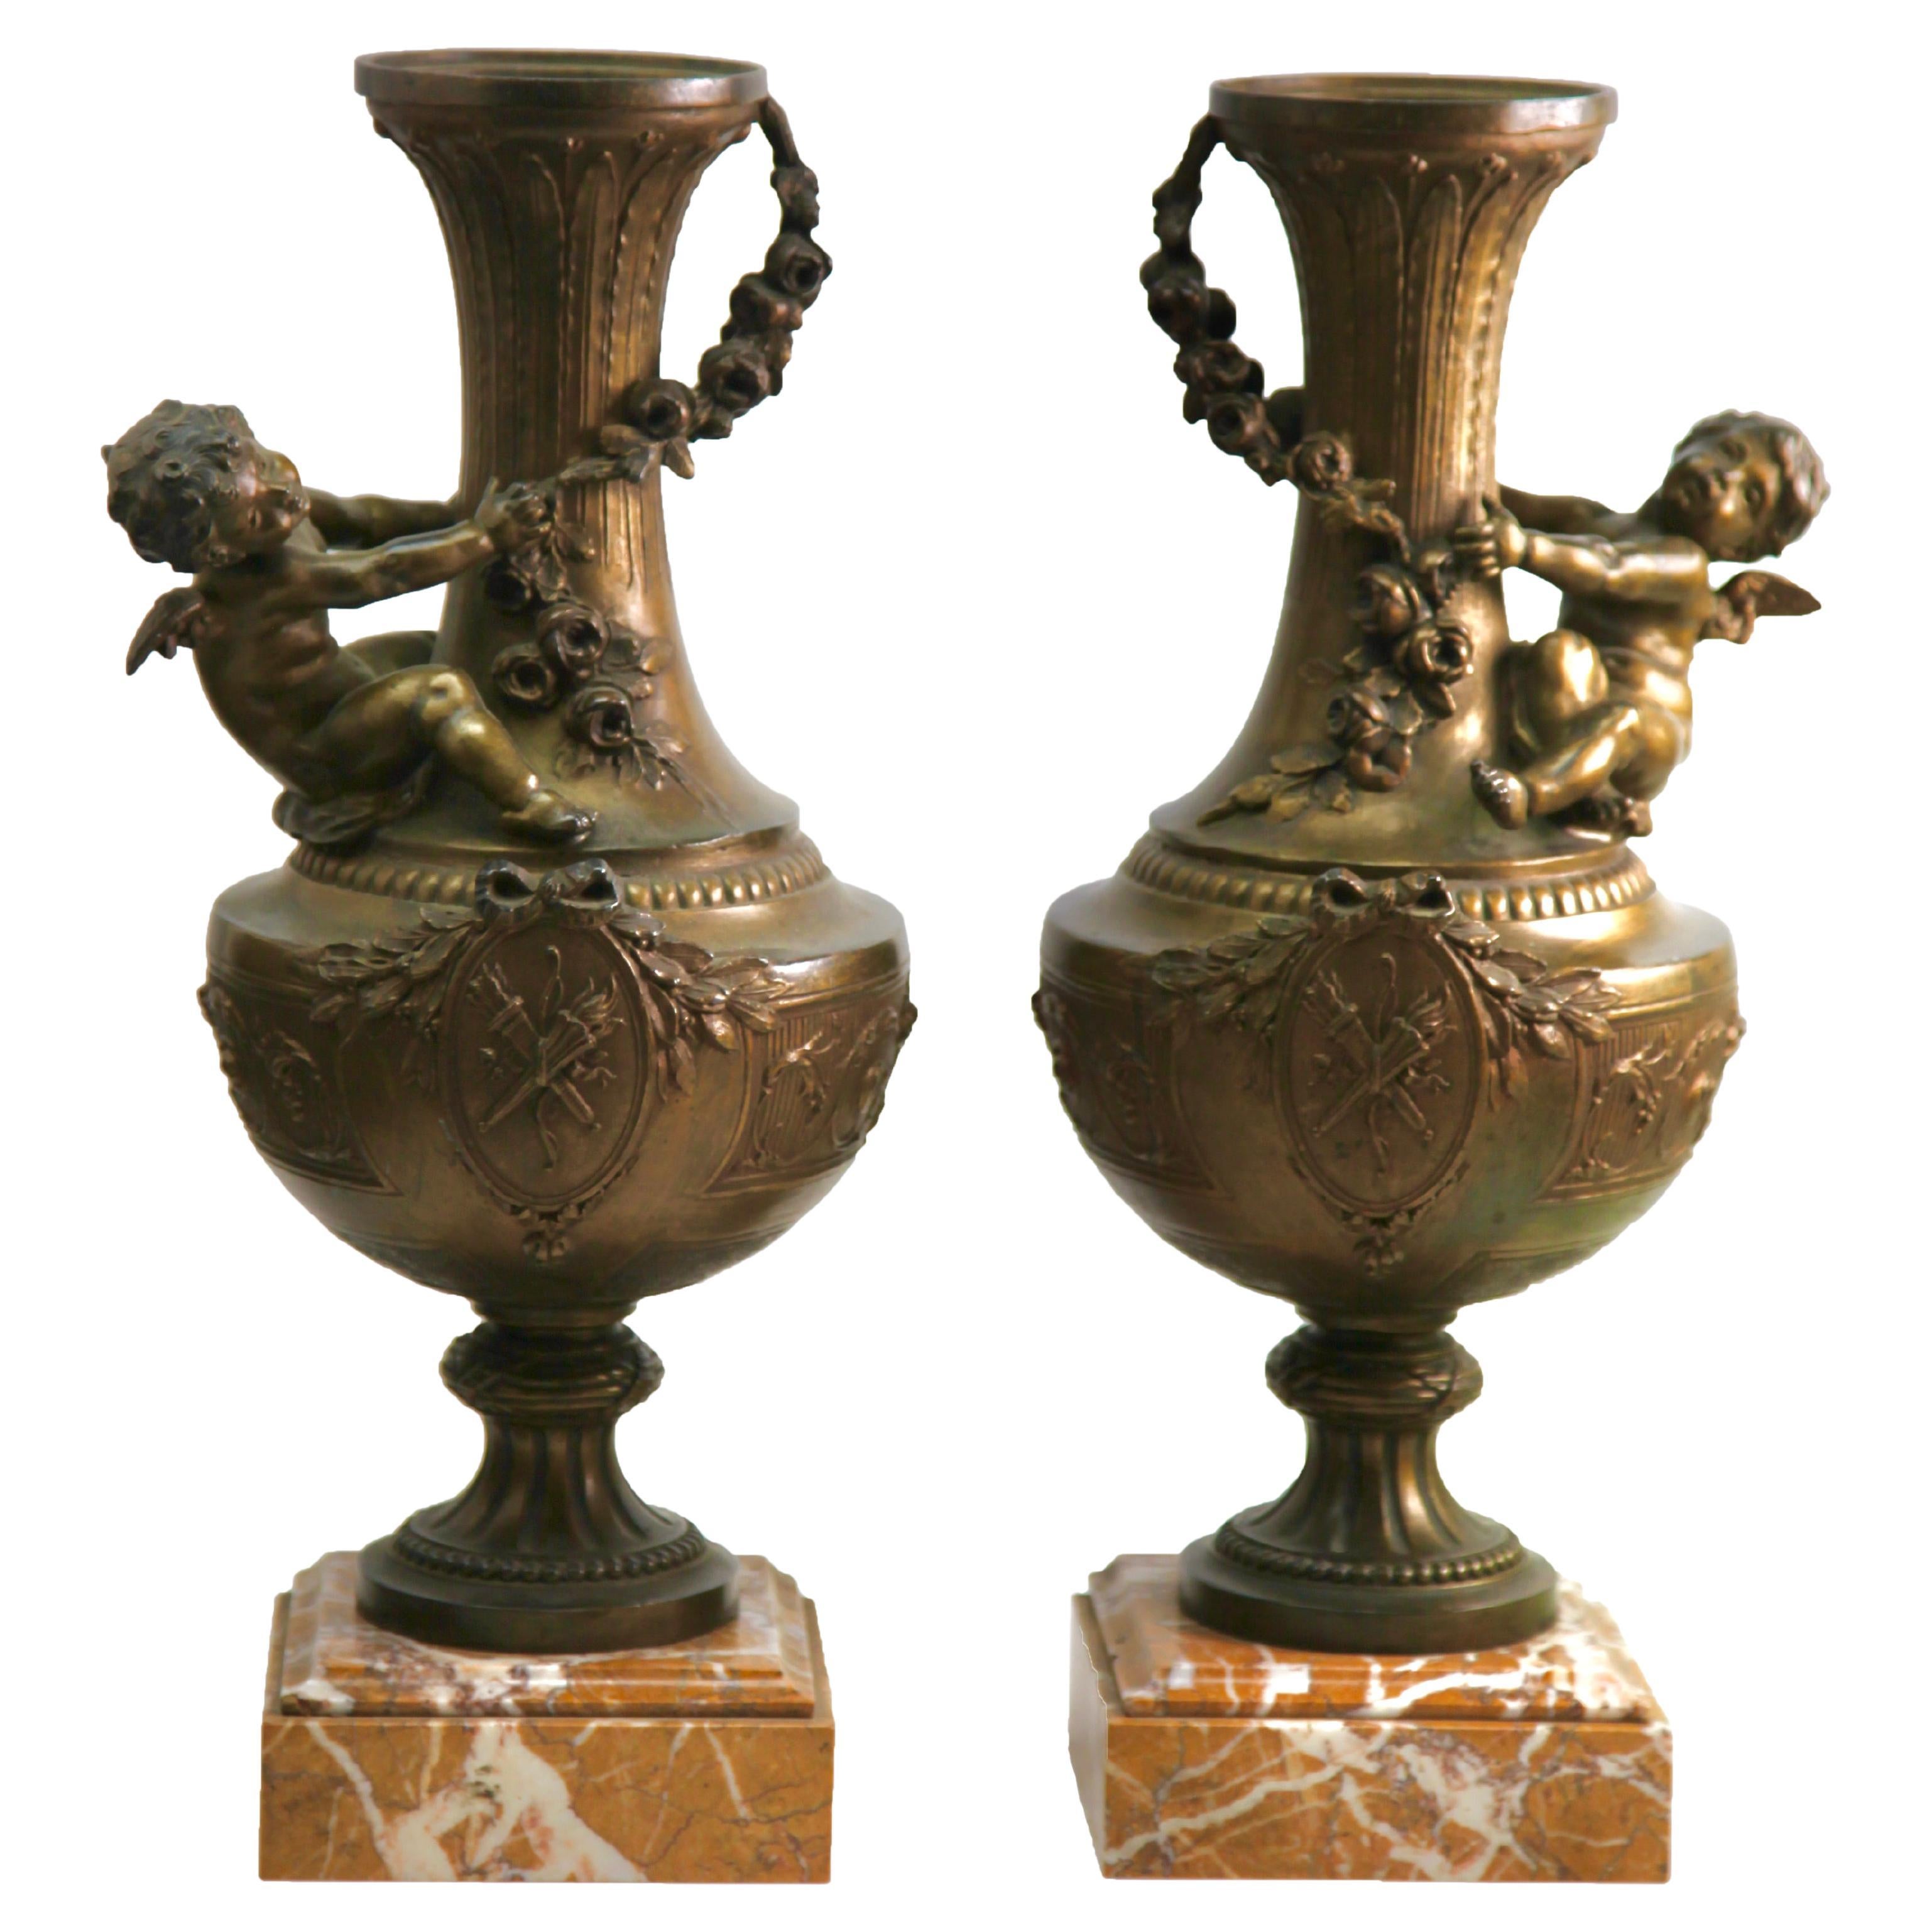 Pair of Ornamented Vases or Lamps with Little Angels and Richly Decorated For Sale